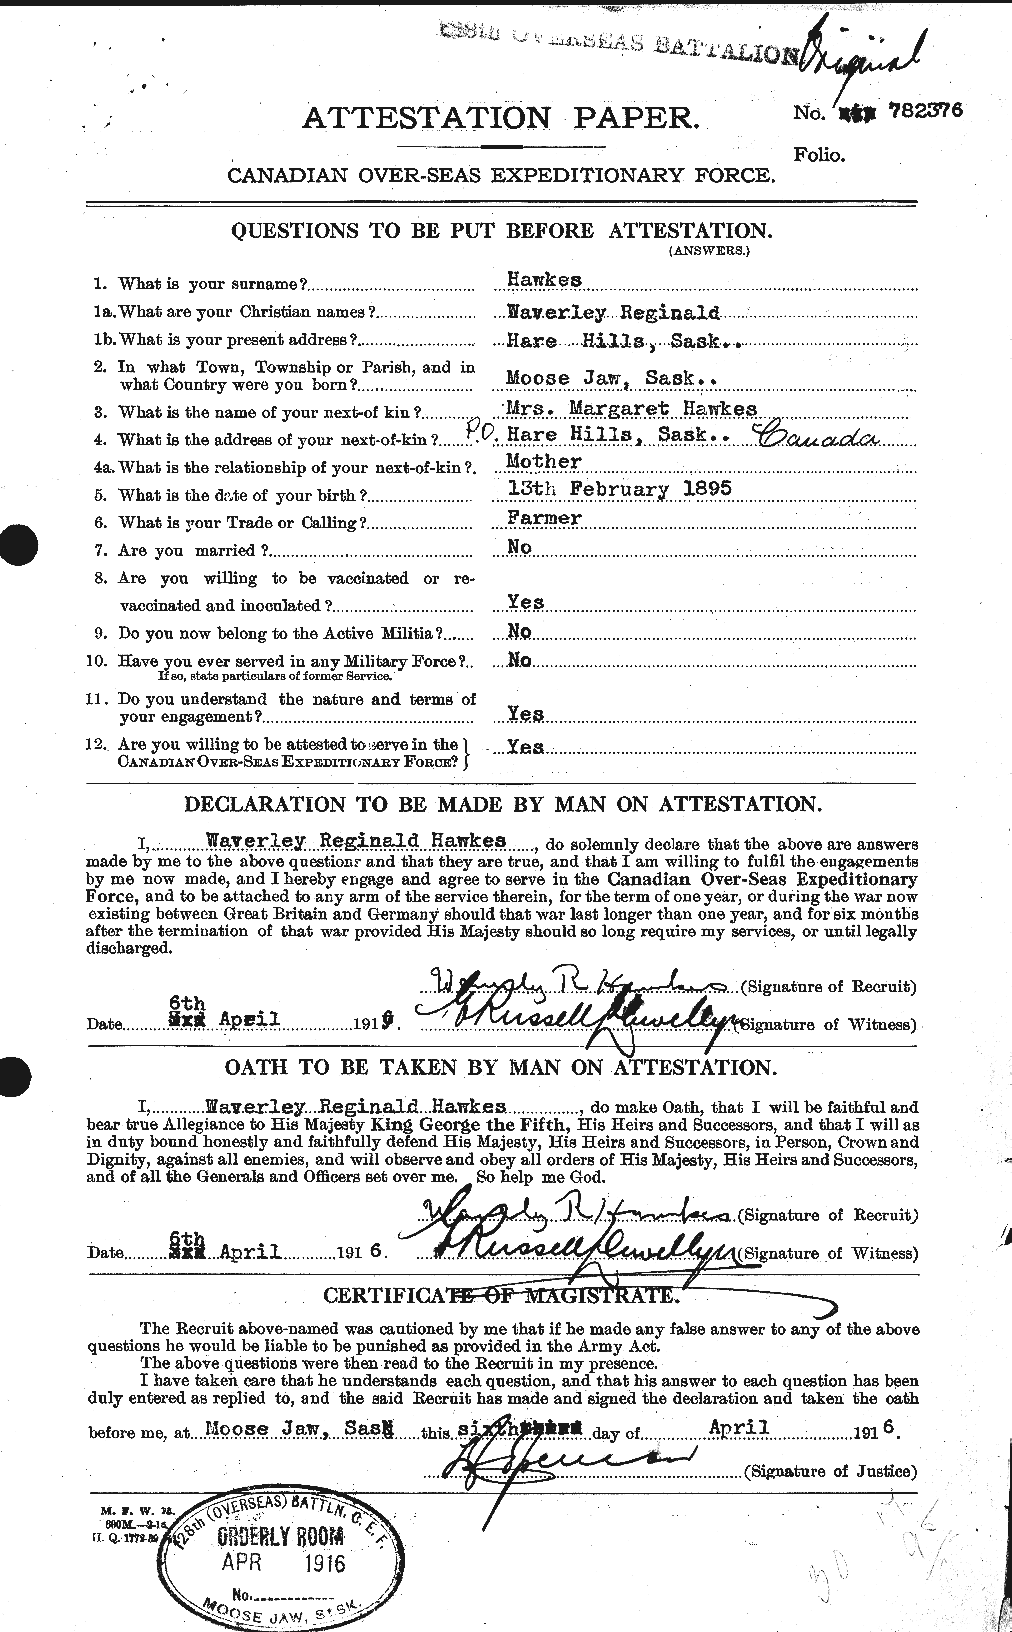 Personnel Records of the First World War - CEF 384574a